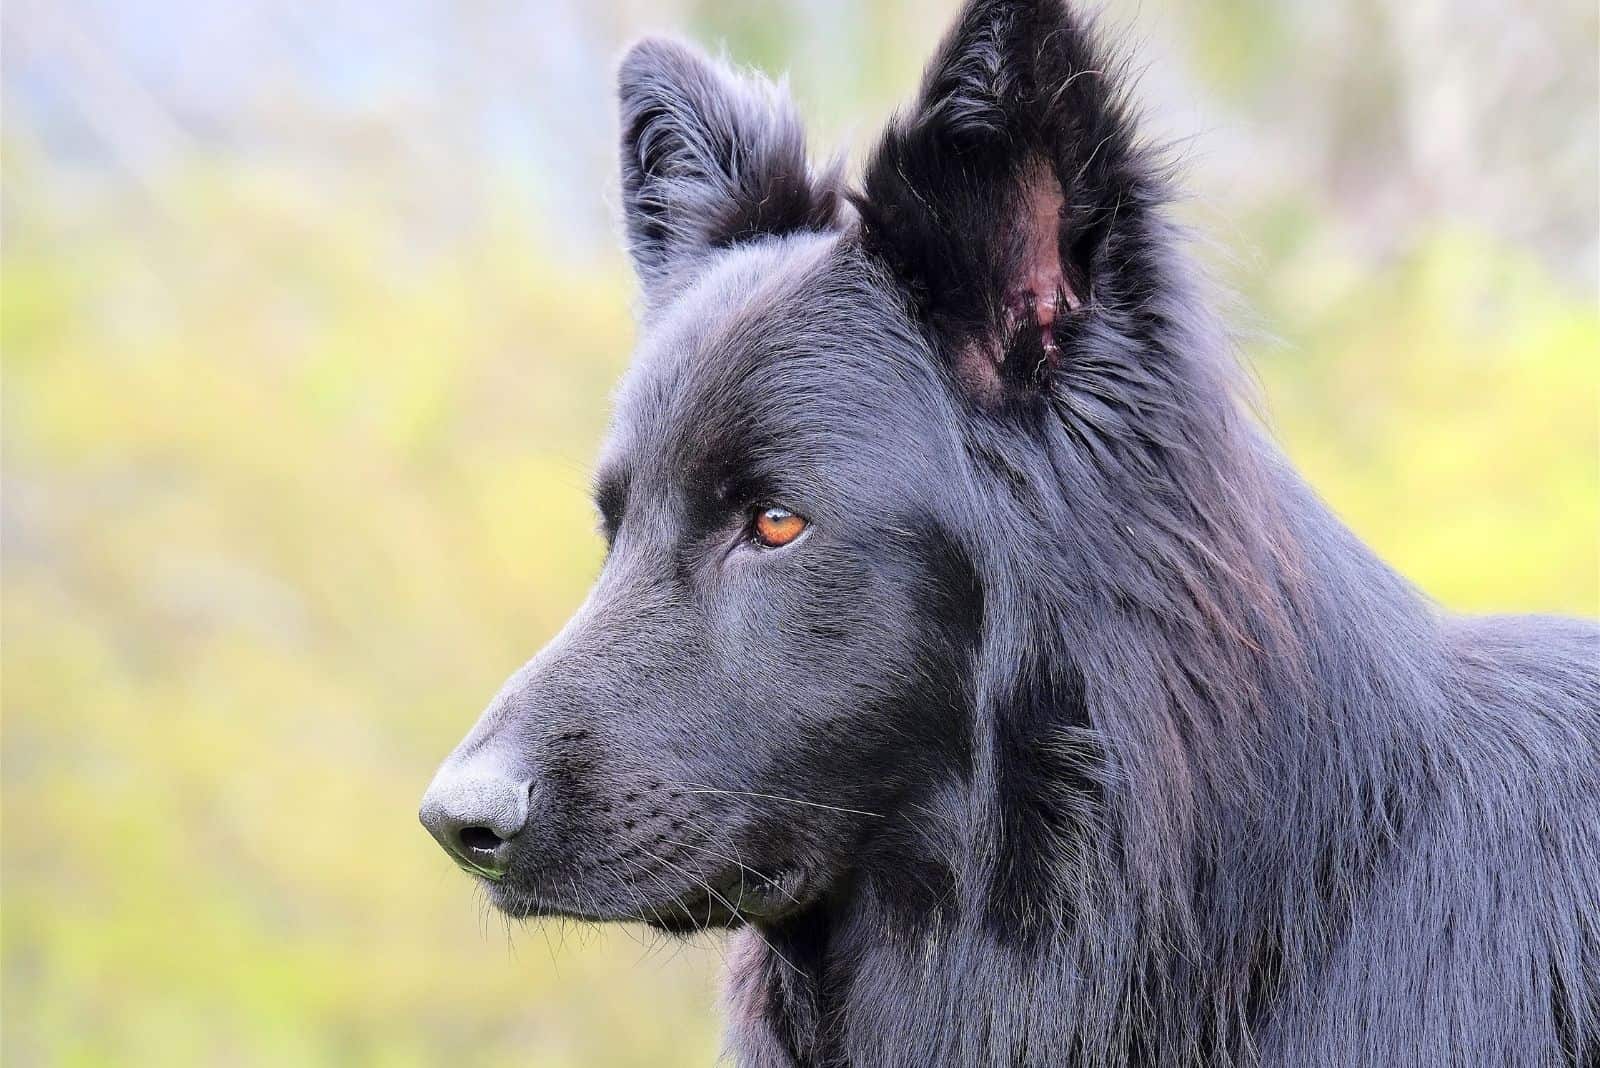 blue german shepherd in a sideview on focus with a blurred outdoor background